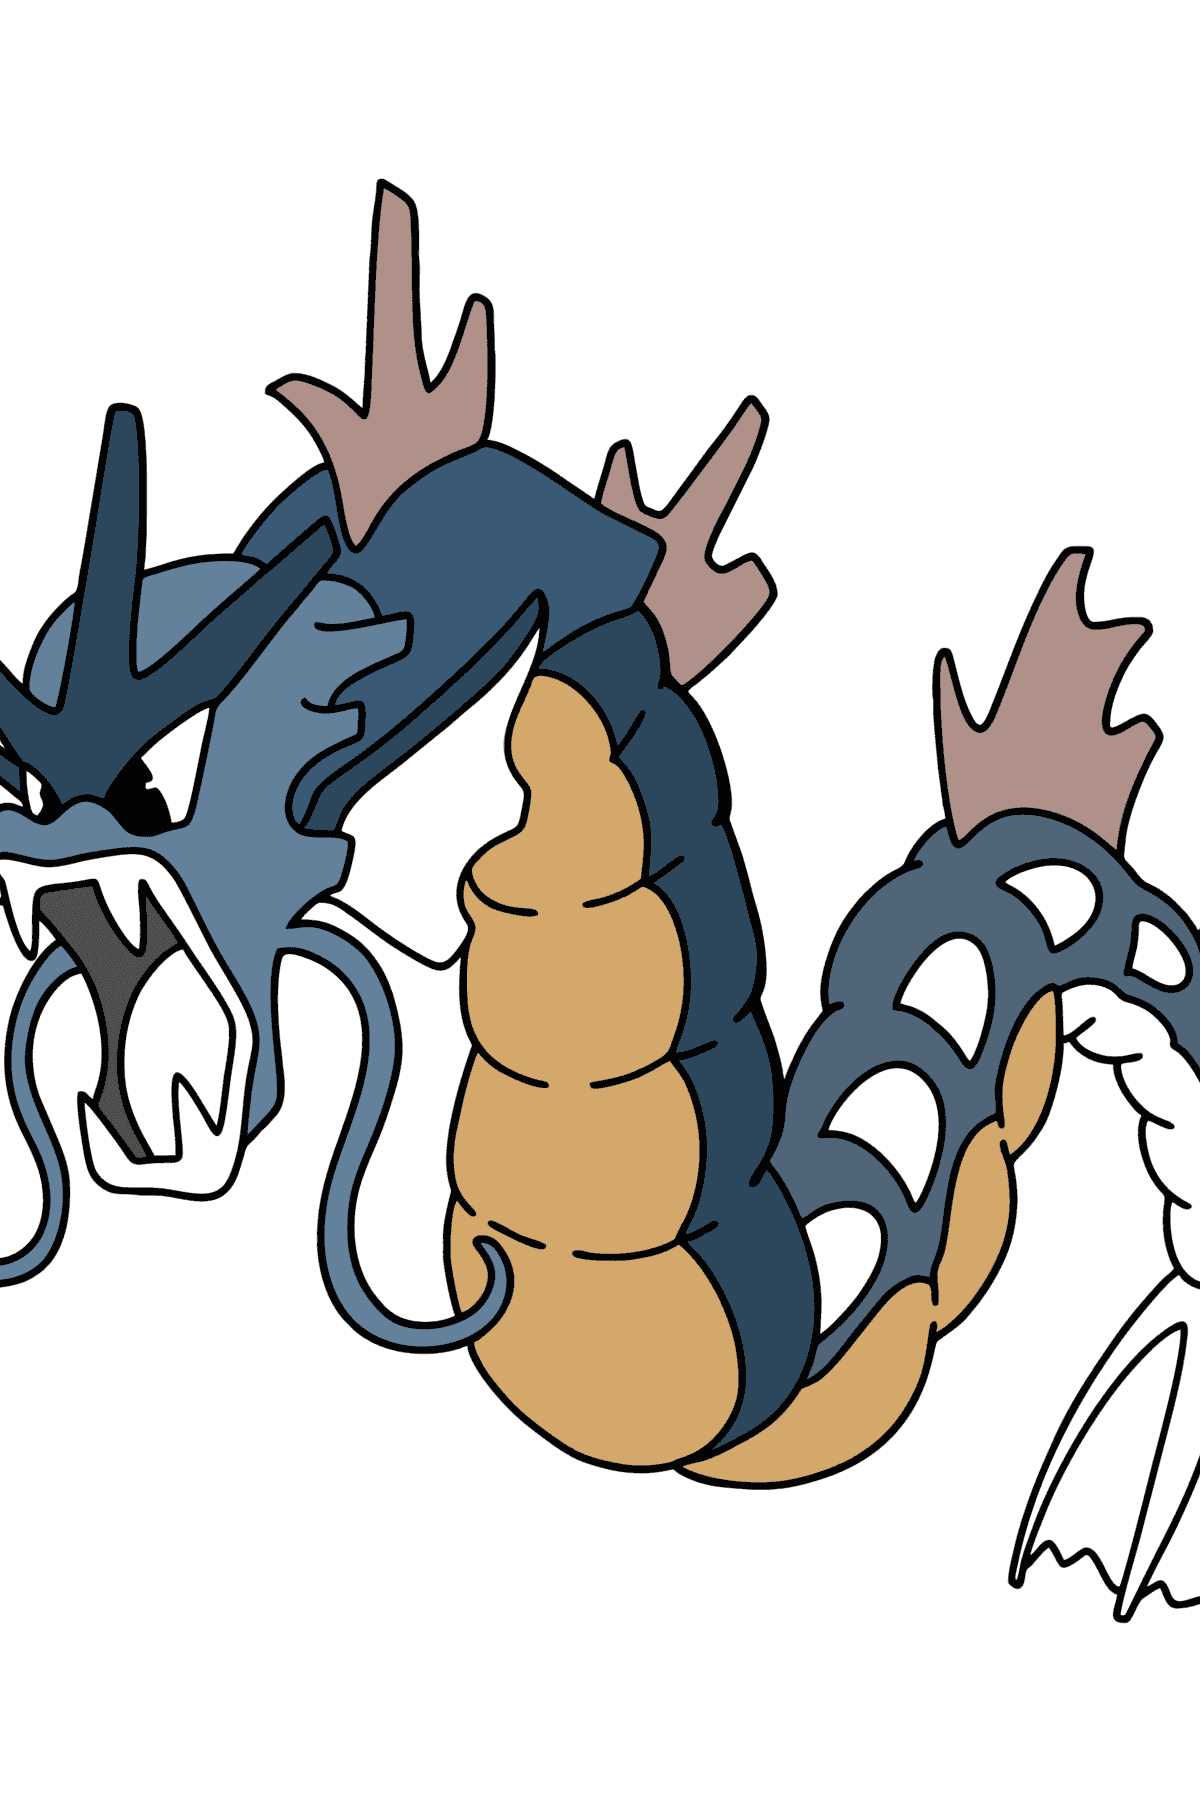 Coloring page Pokemon Go Gyarados - Coloring Pages for Kids